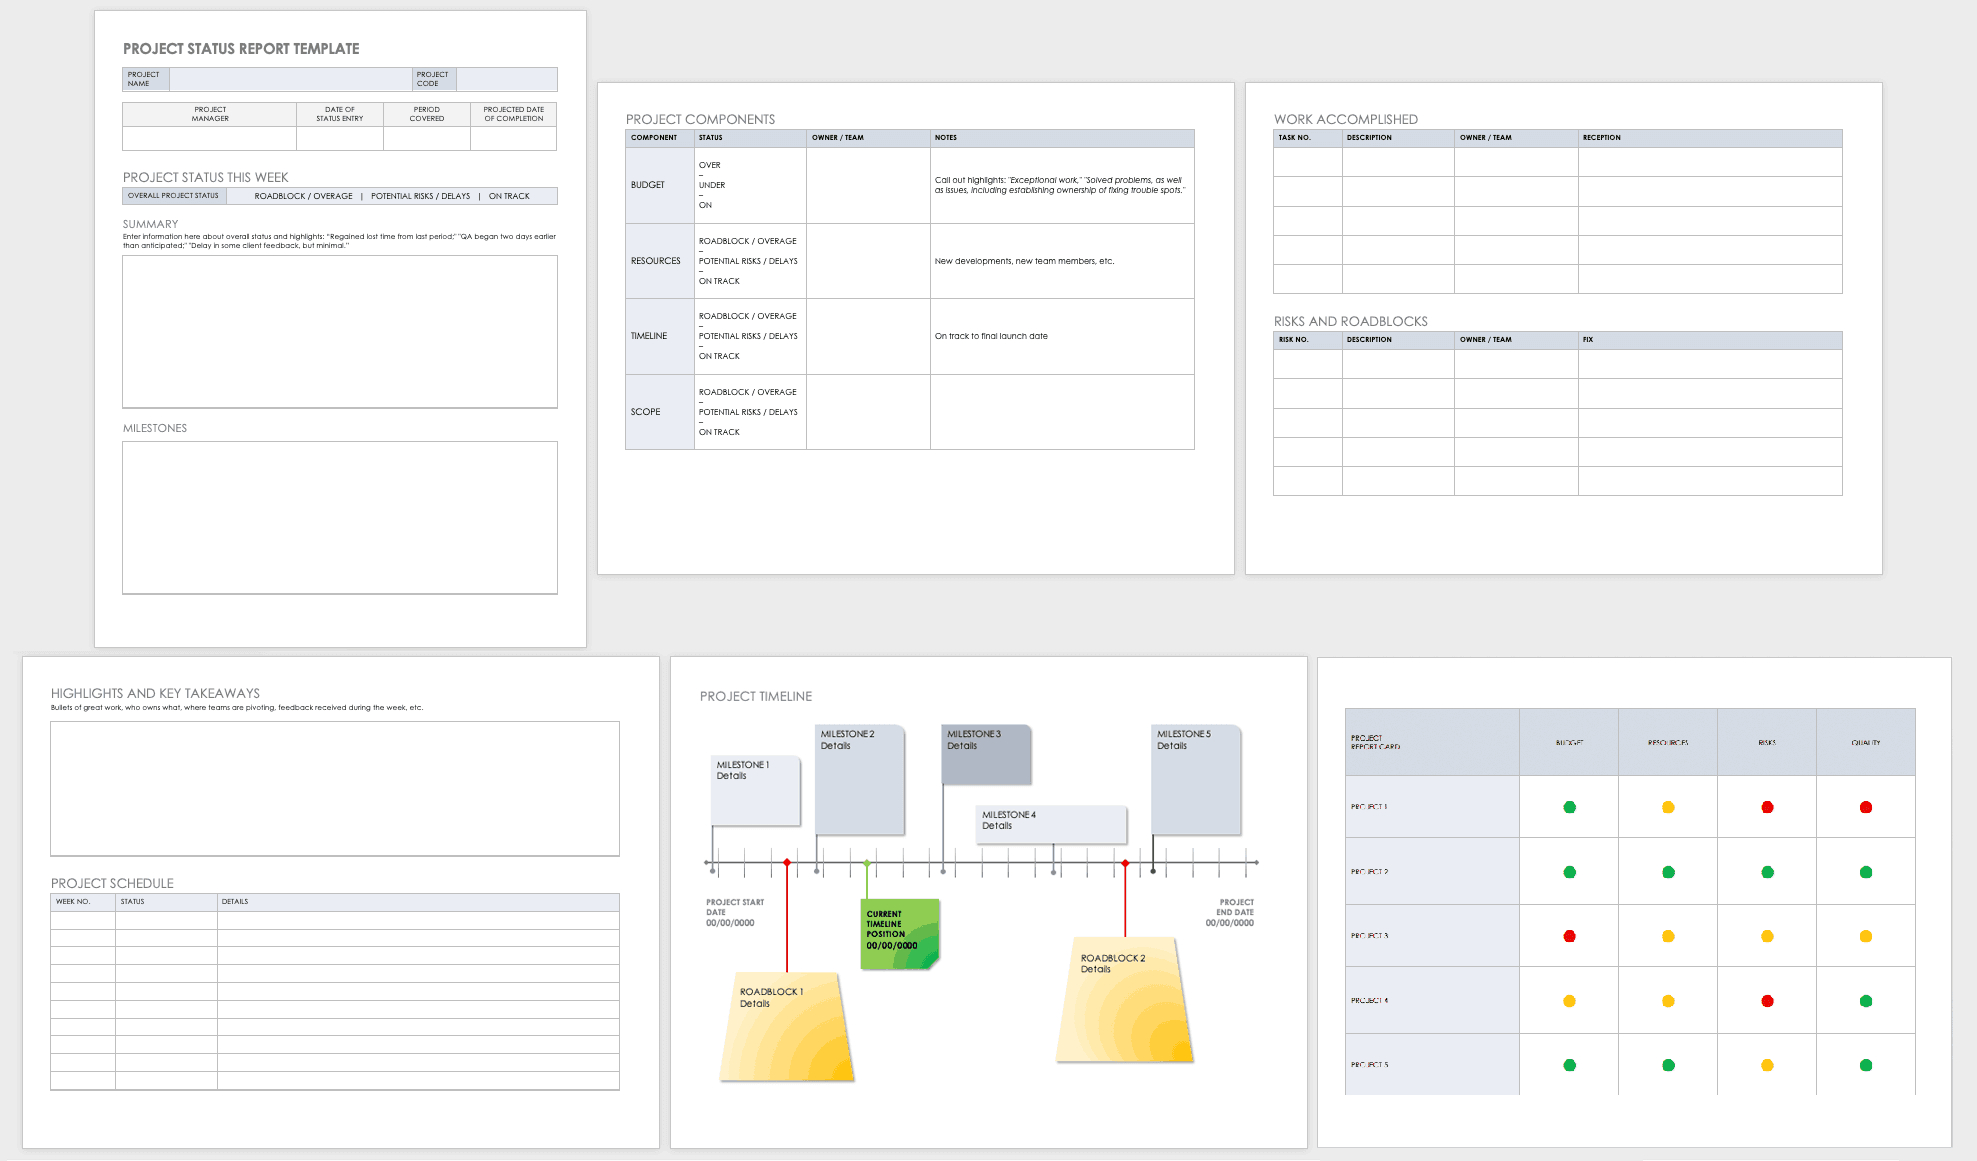 Free Project Report Templates | Smartsheet For Project Manager Status Report Template